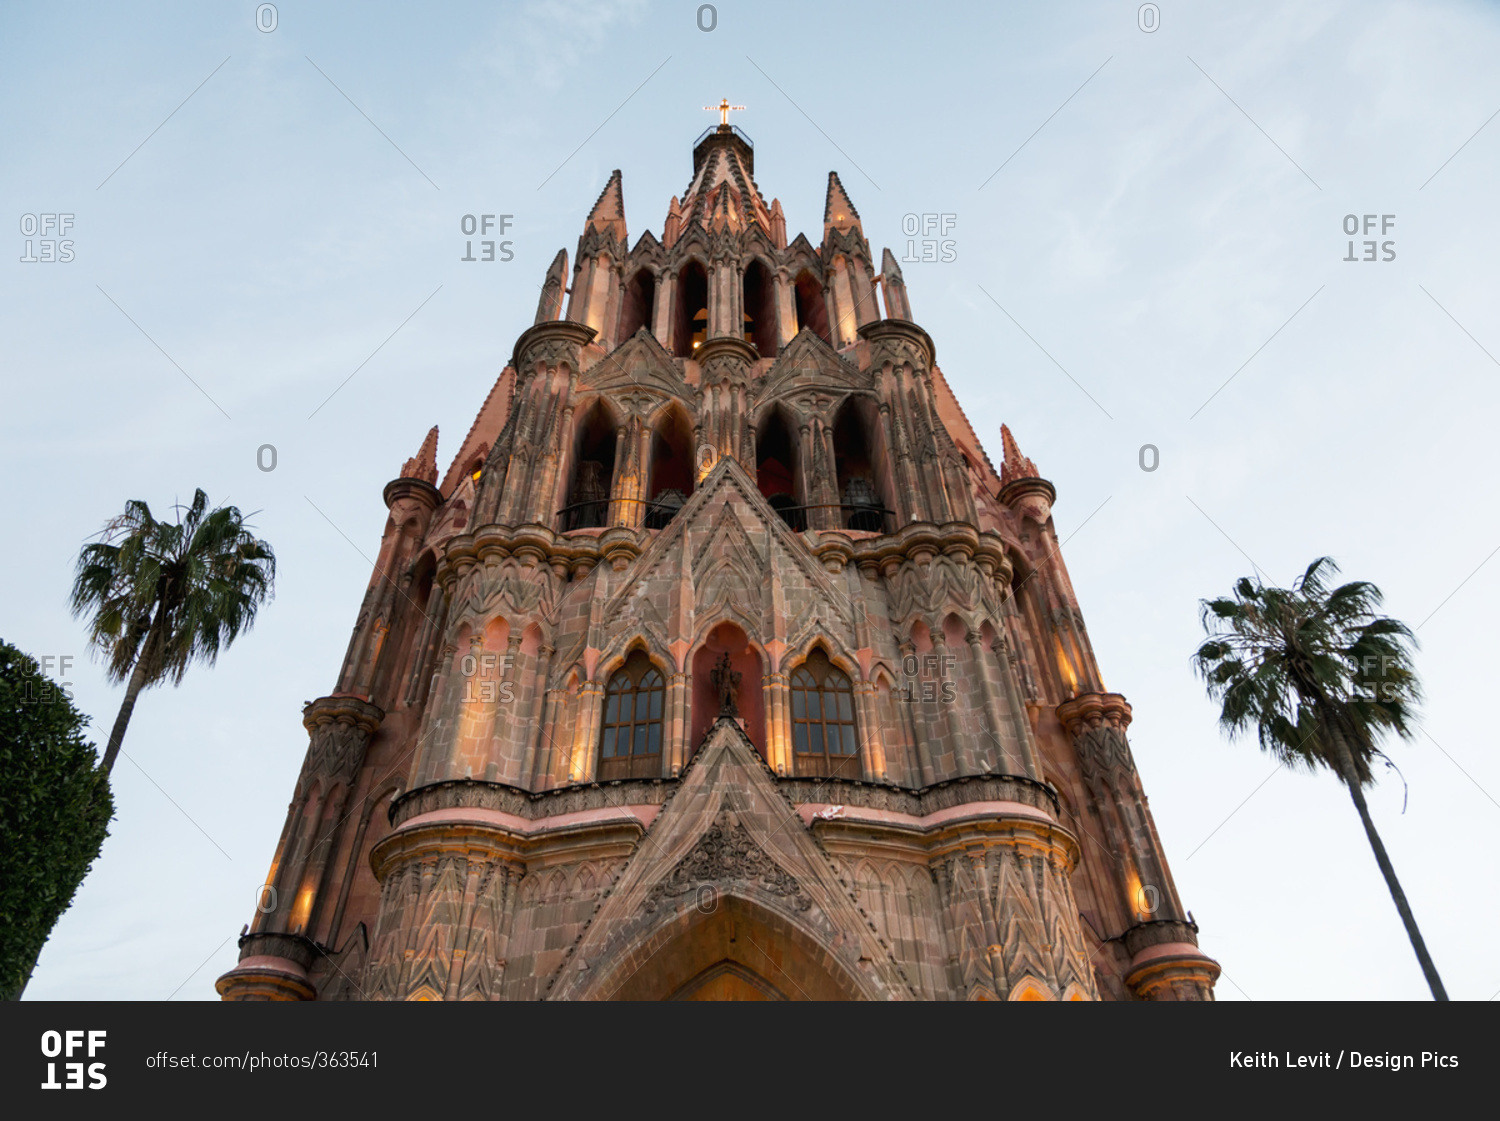 Church building with palm trees on either side; San Miguel de Allende, Guanajuato, Mexico